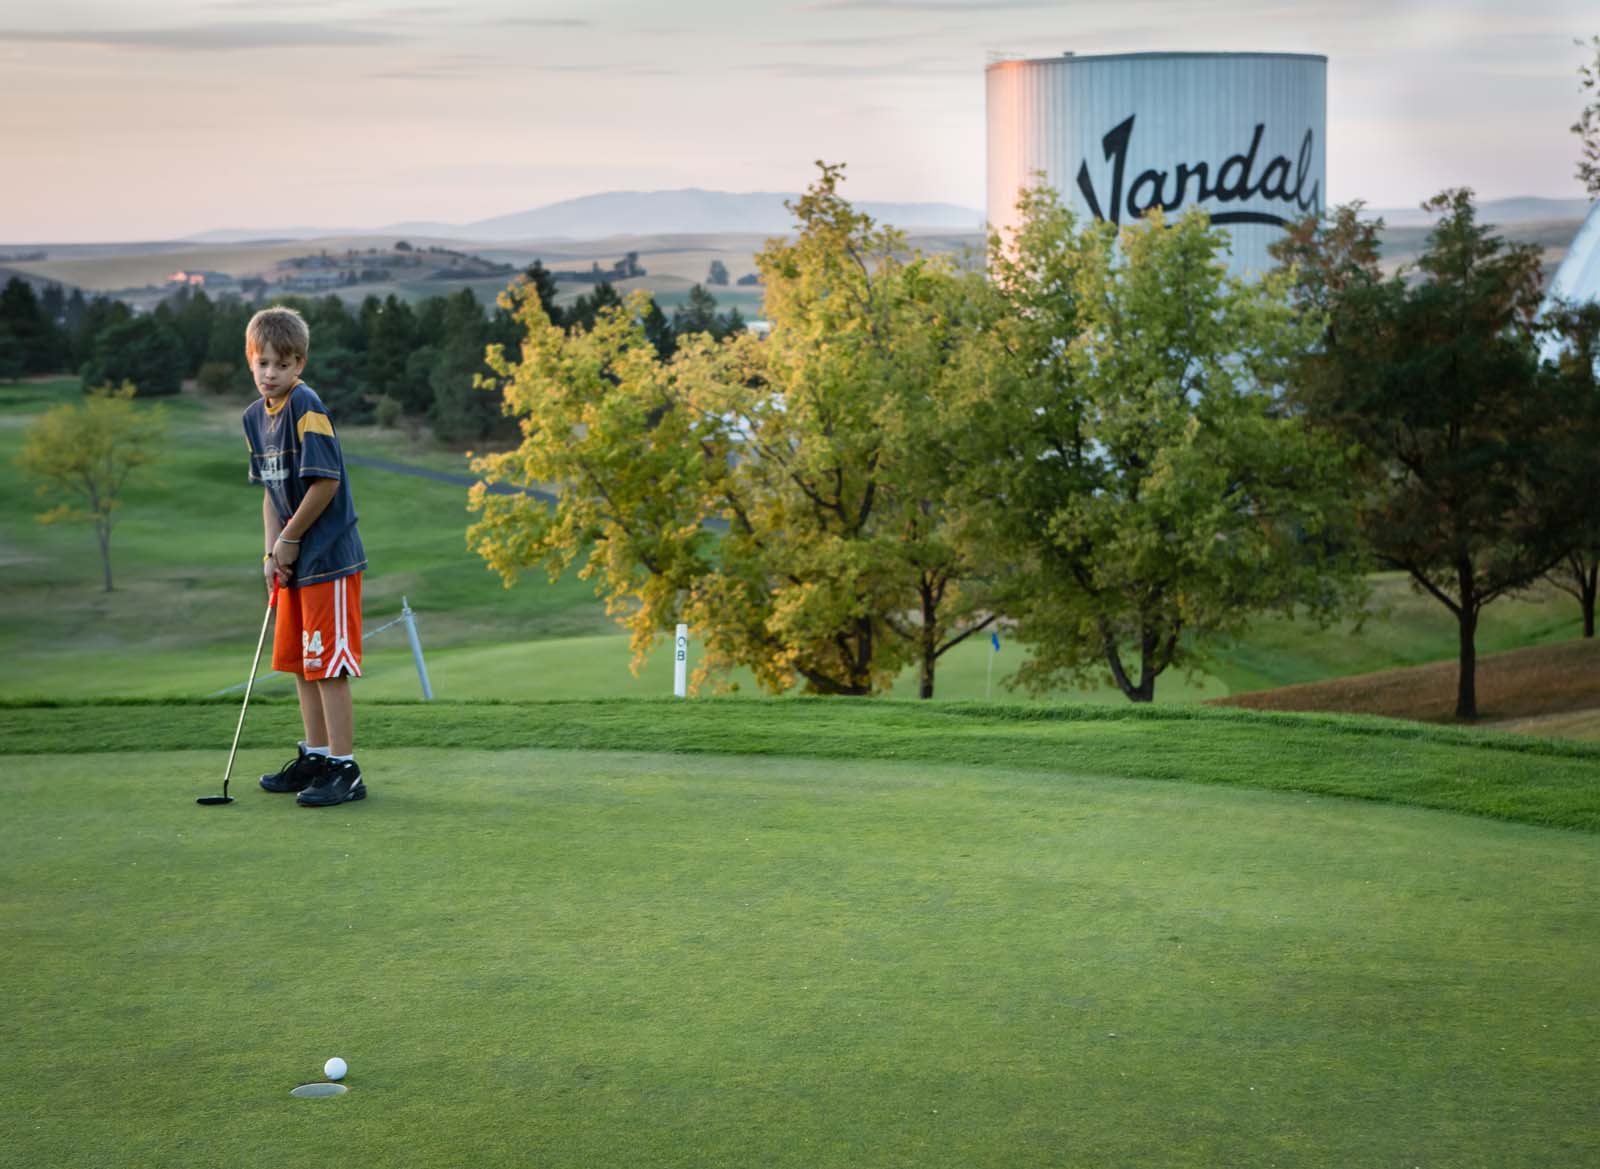 Child putting at the Vandal golf course